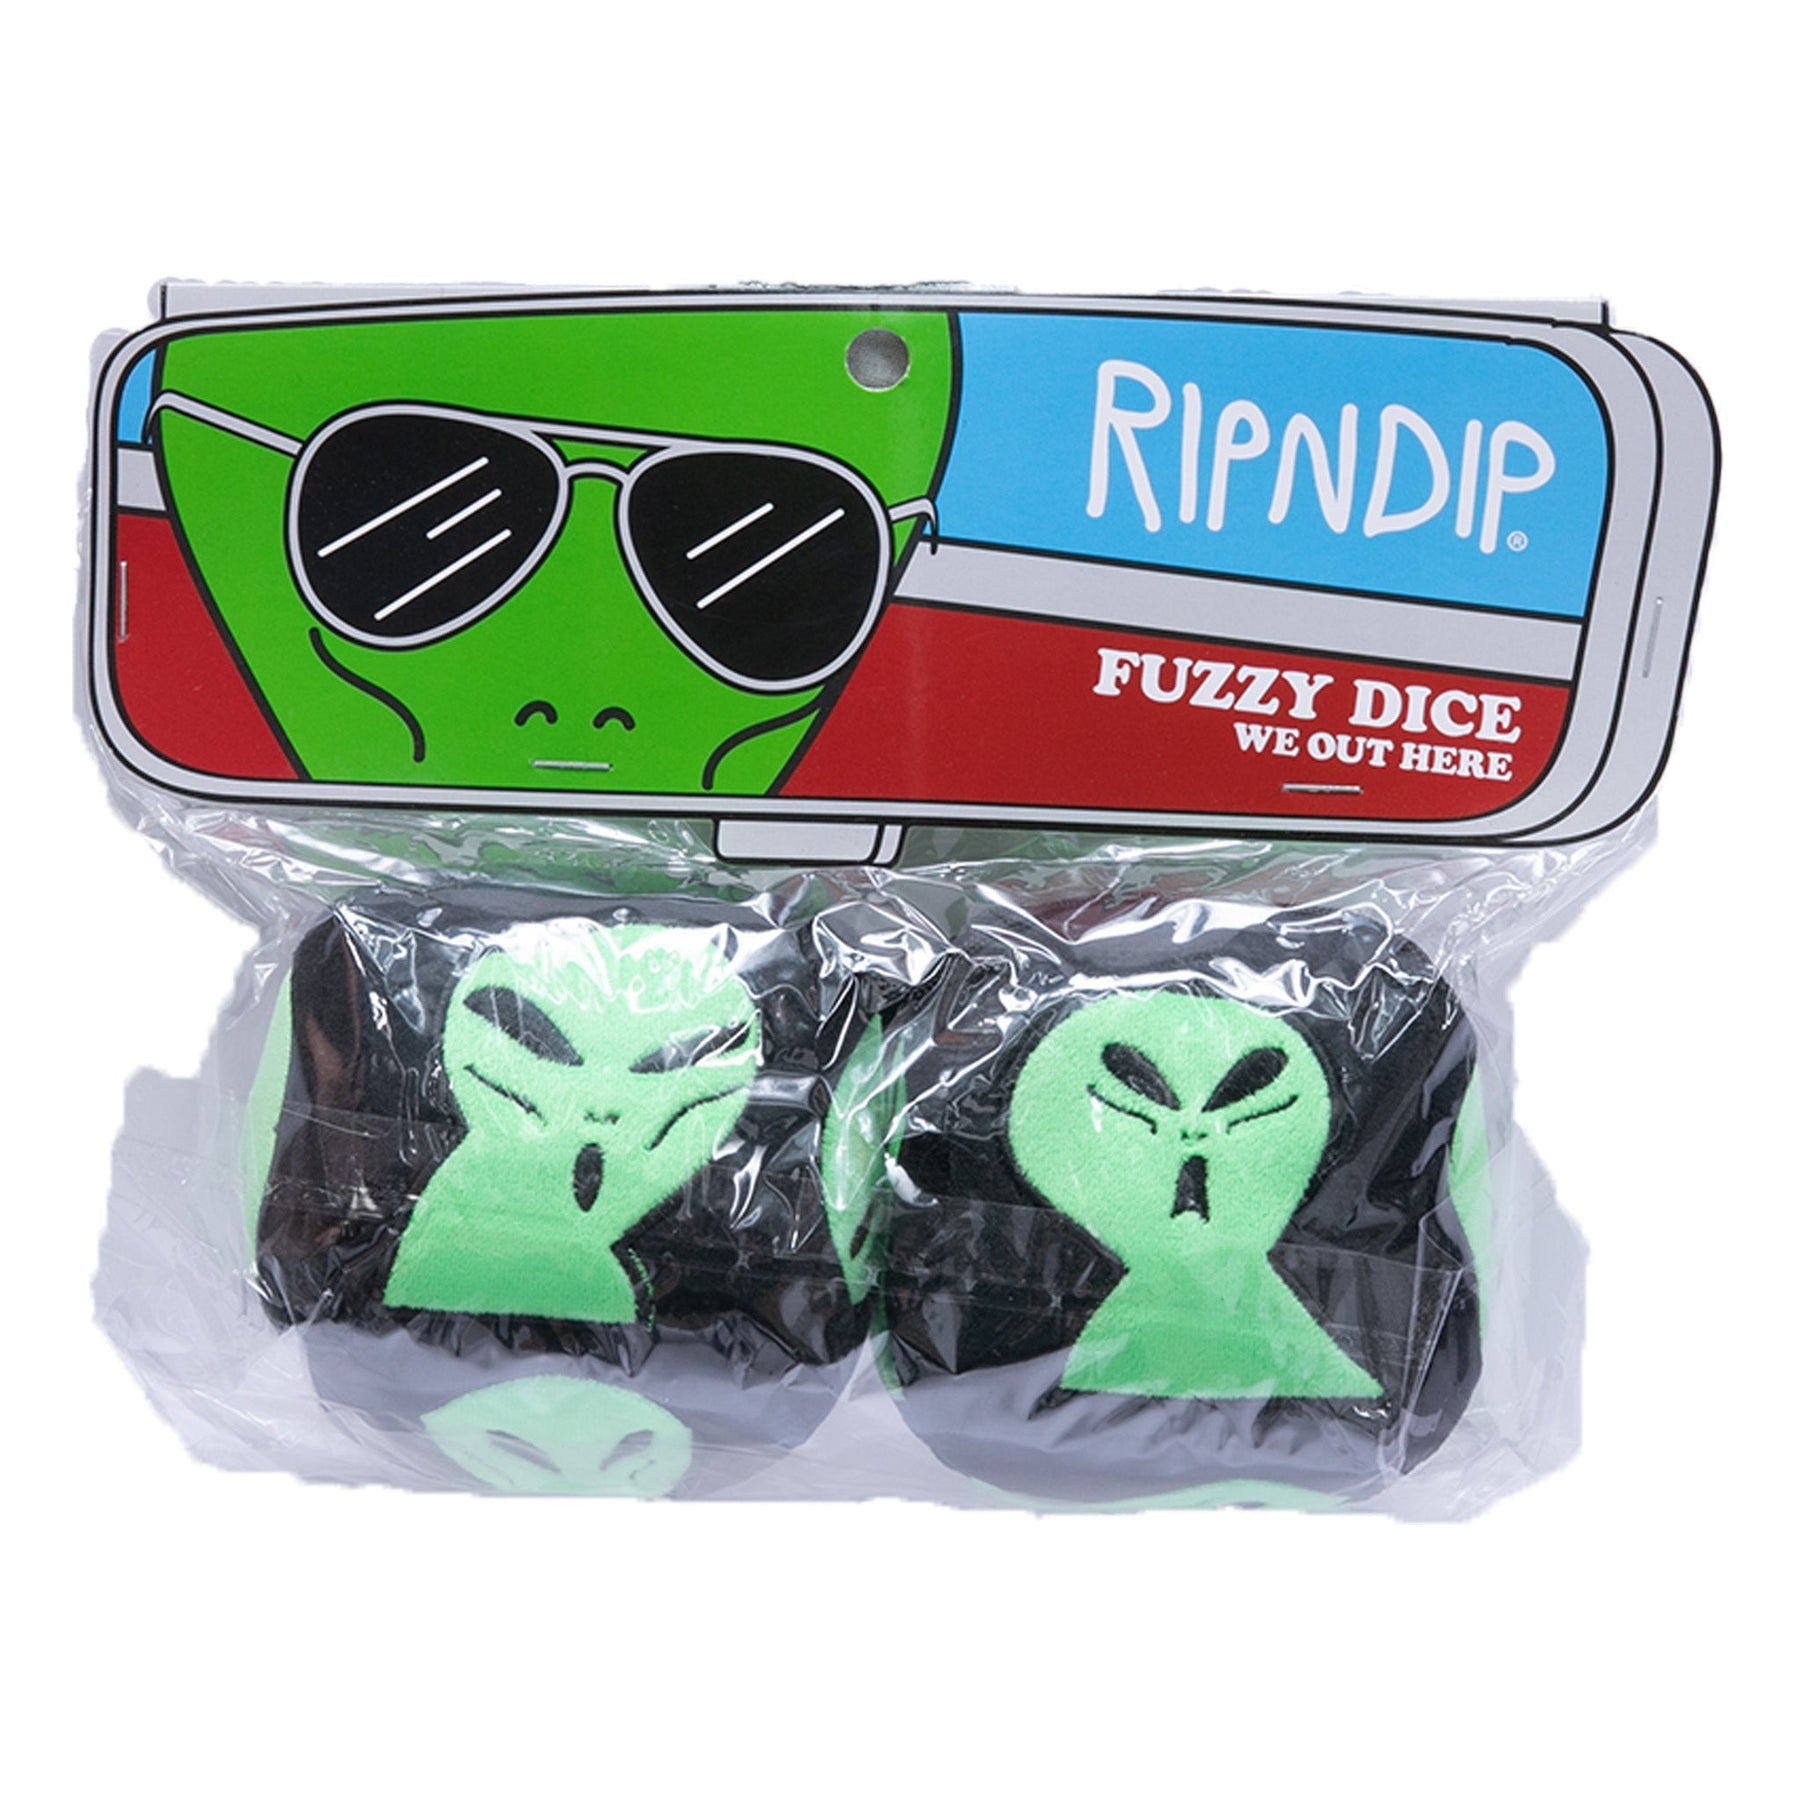 DADOS PARA AUTO RIPNDIP WE OUT HERE FUZZY DICE BLK